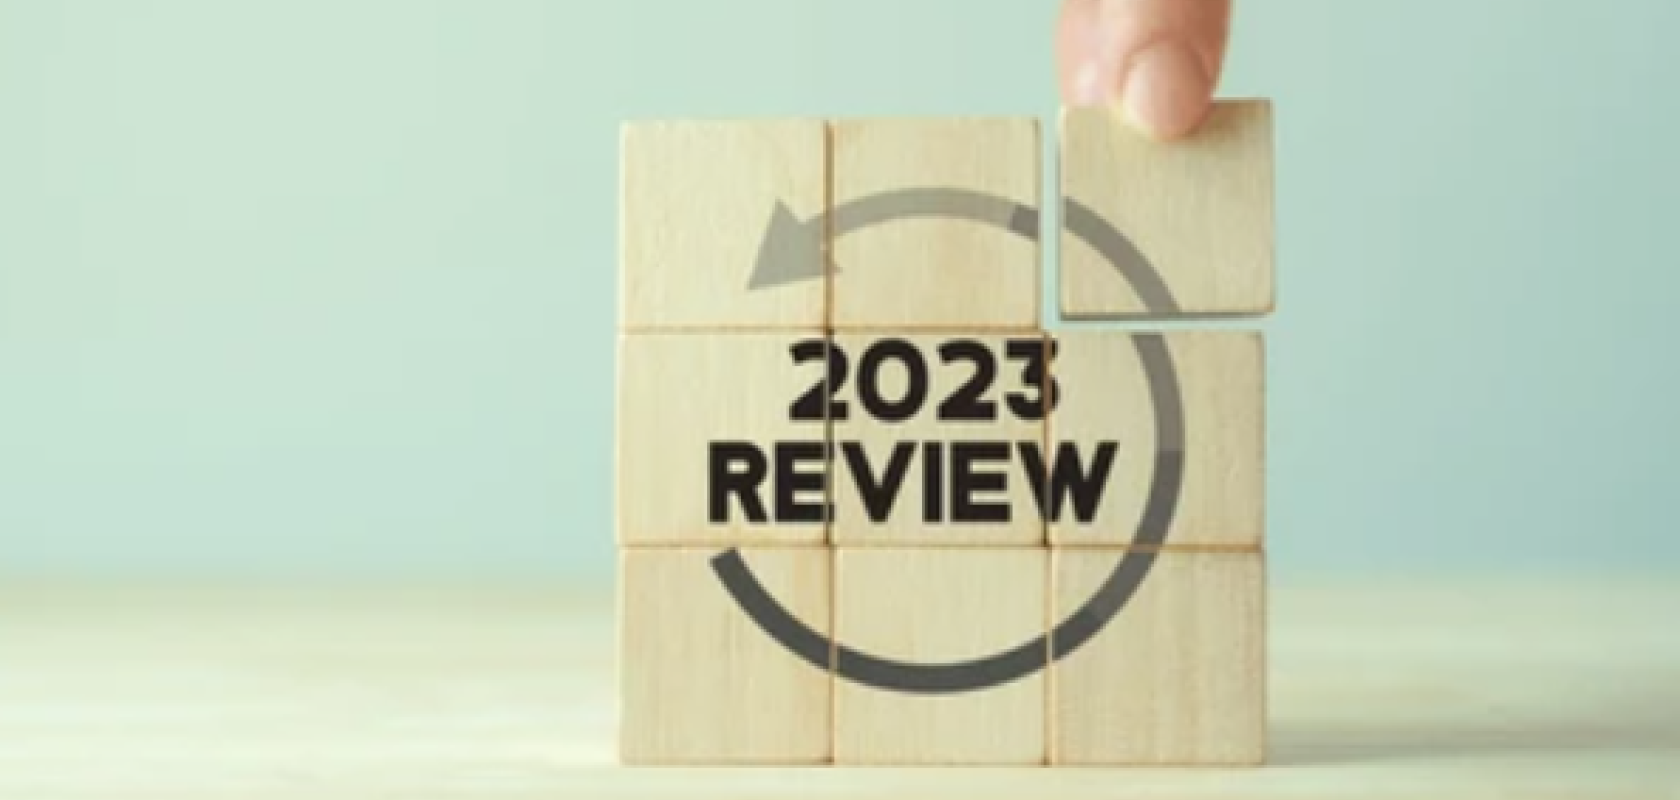 2023 optical communications developments in-review